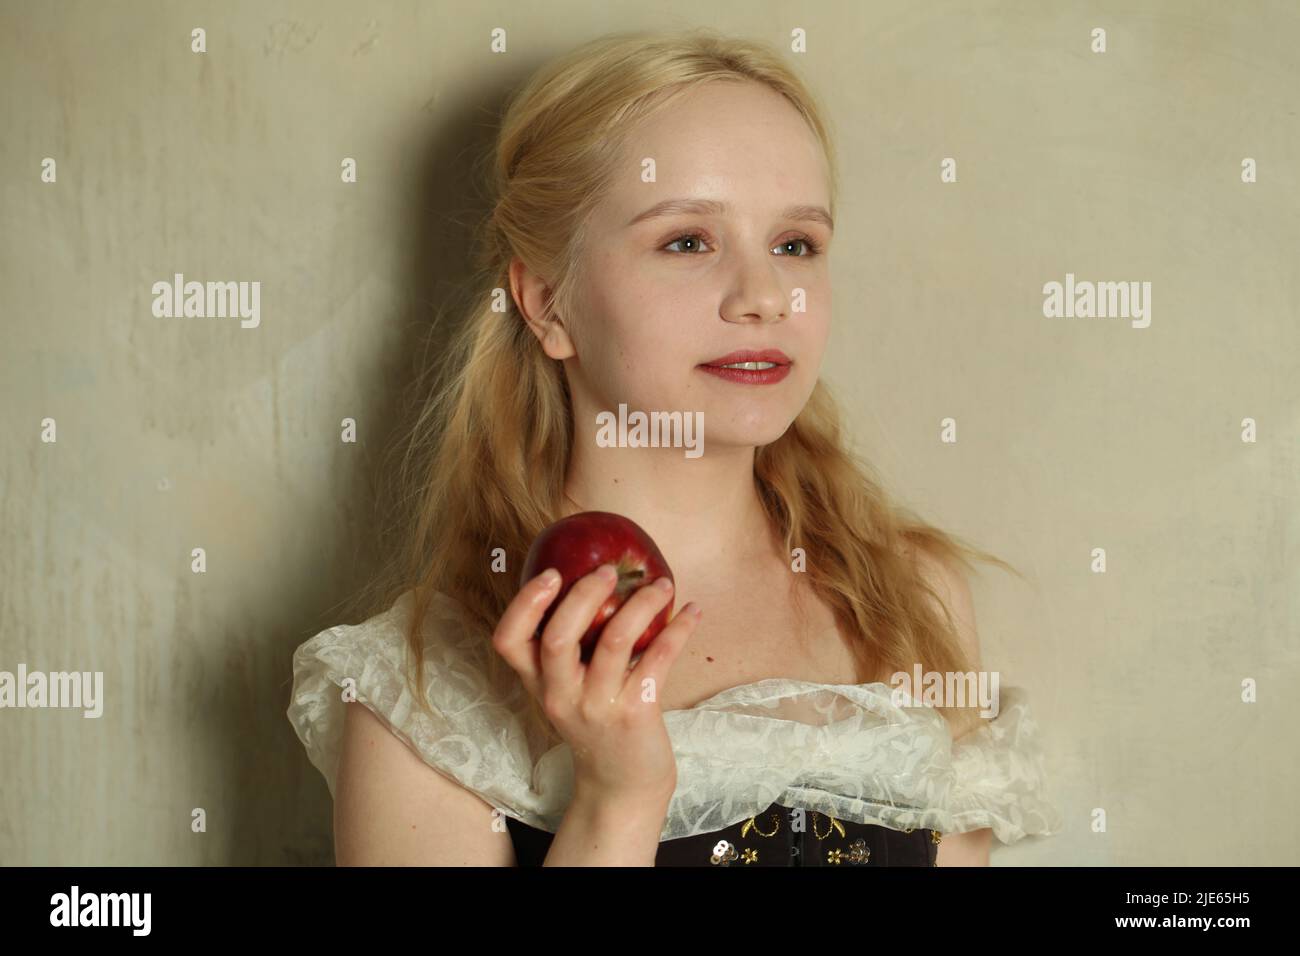 Portrait of young blonde woman with red apple close up Stock Photo